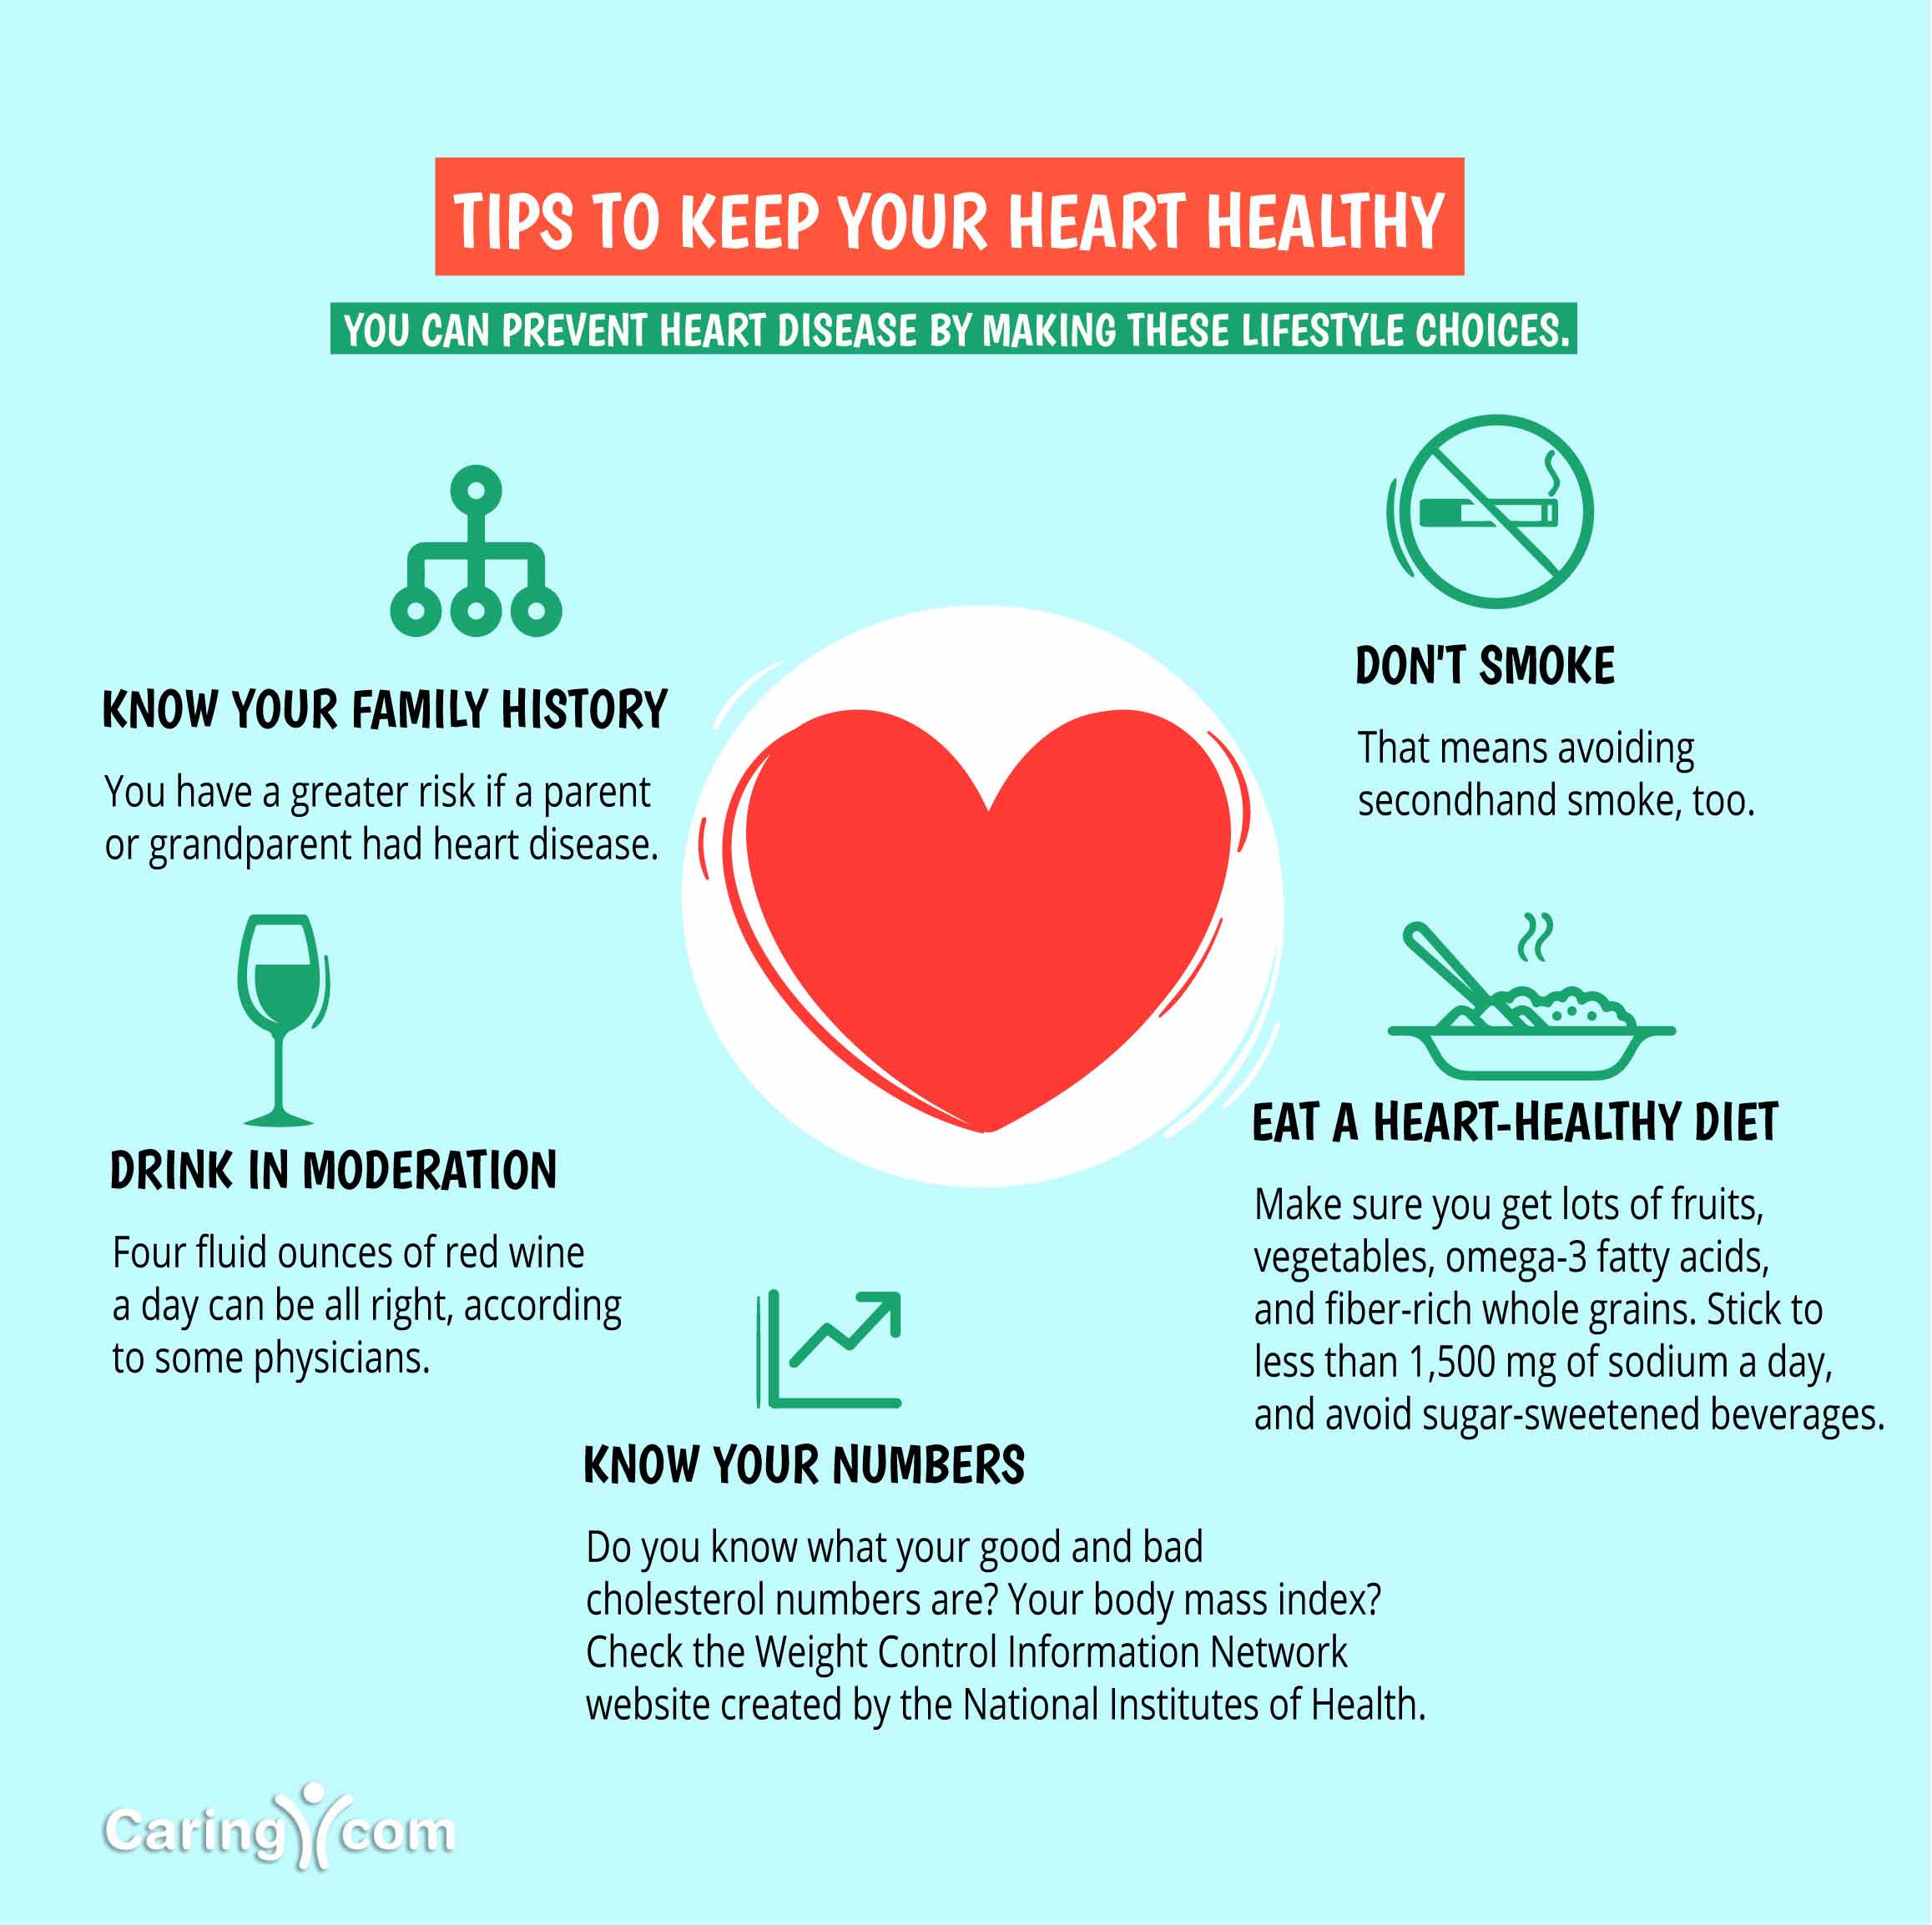 Tips to keep your heart healthy